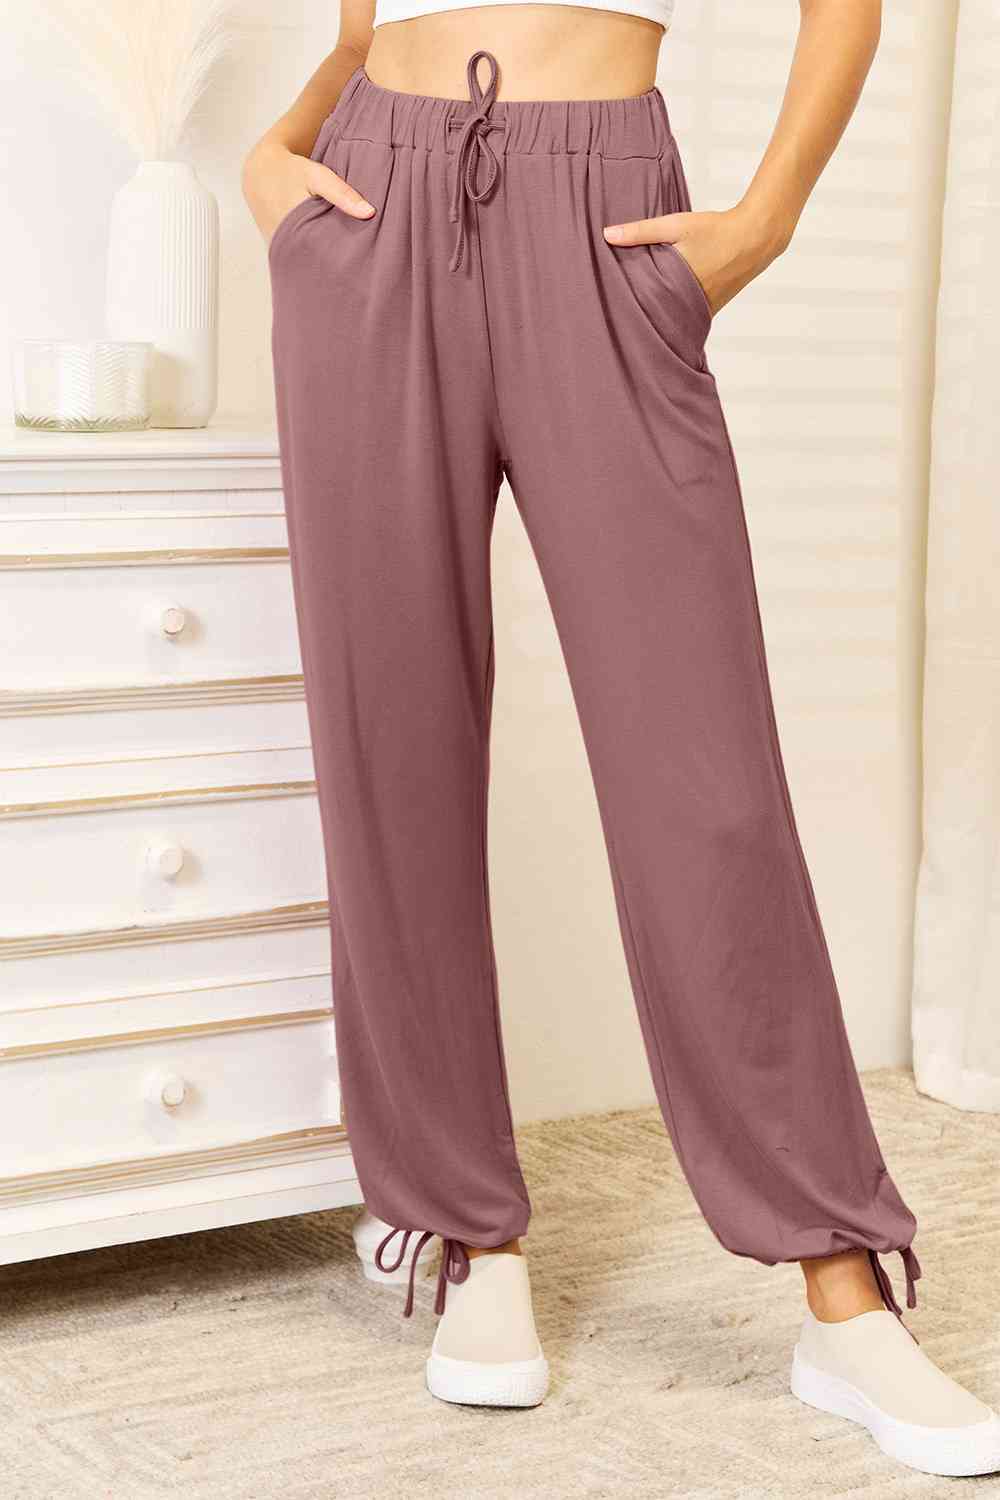 Soft Rayon Drawstring Waist Pants with Pockets - Kawaii Stop - Basic Bae, Casual Chic, Comfortable Style, Custom Fit, Drawstring Waist Pants, Everyday Wear, High-Quality Material, Lounge Pants, Must-Have Pants, Opaque Fabric, Practical Pockets, Ship from USA, Stylish Outfit, Wardrobe Essential